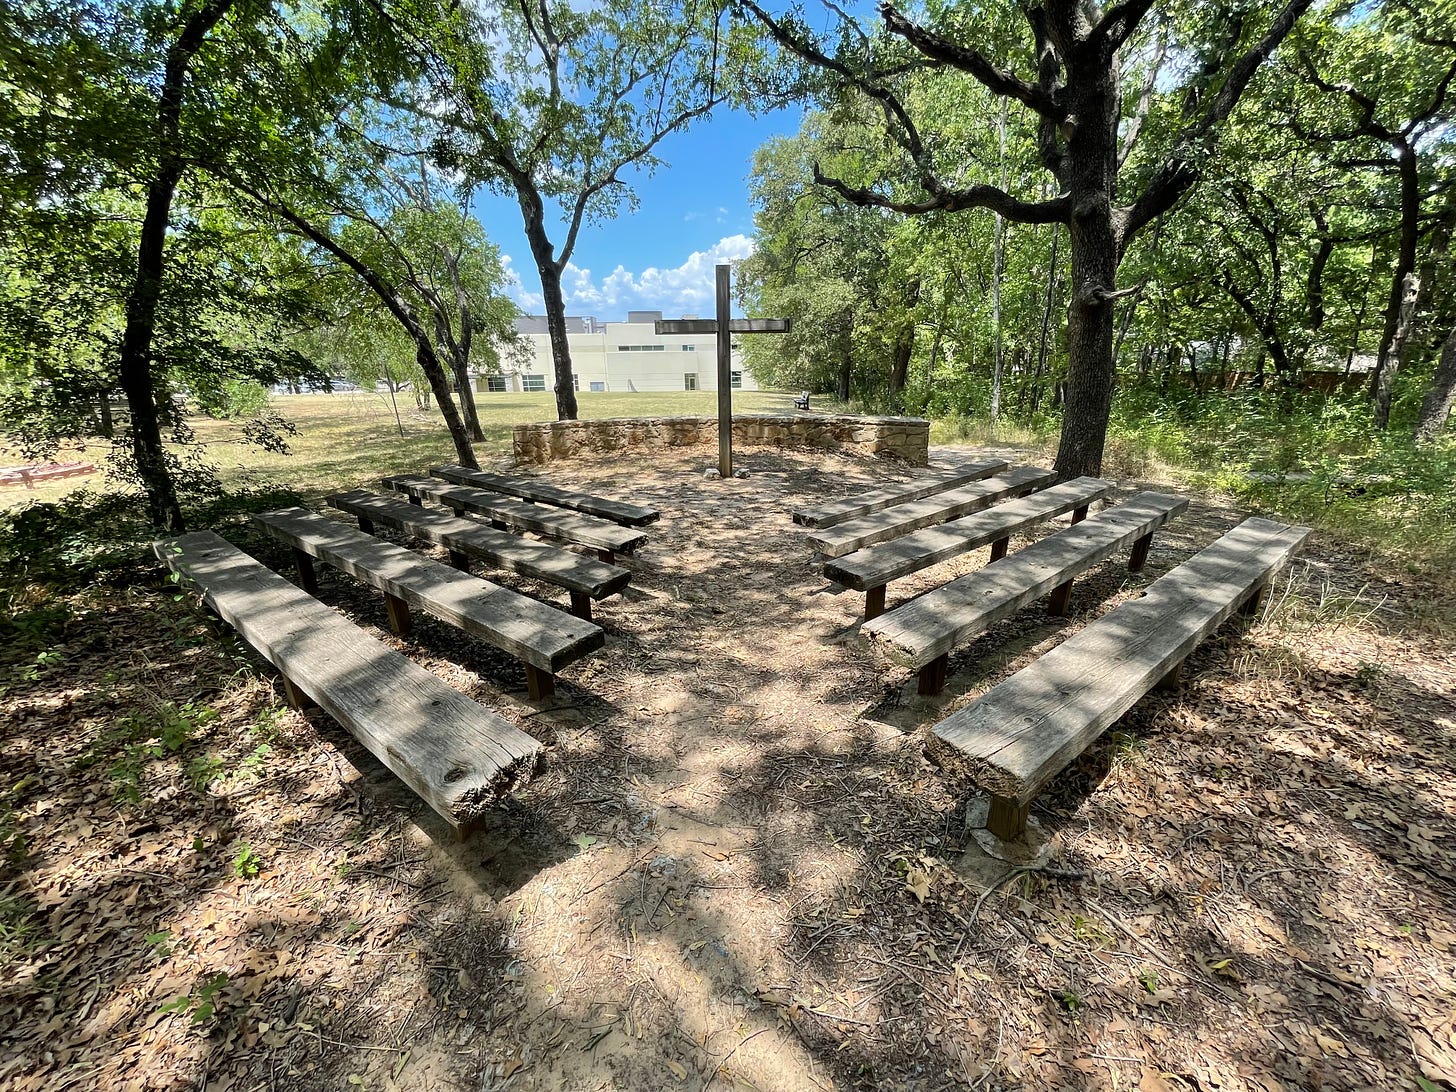 Eight shaded benches facing a wooden cross